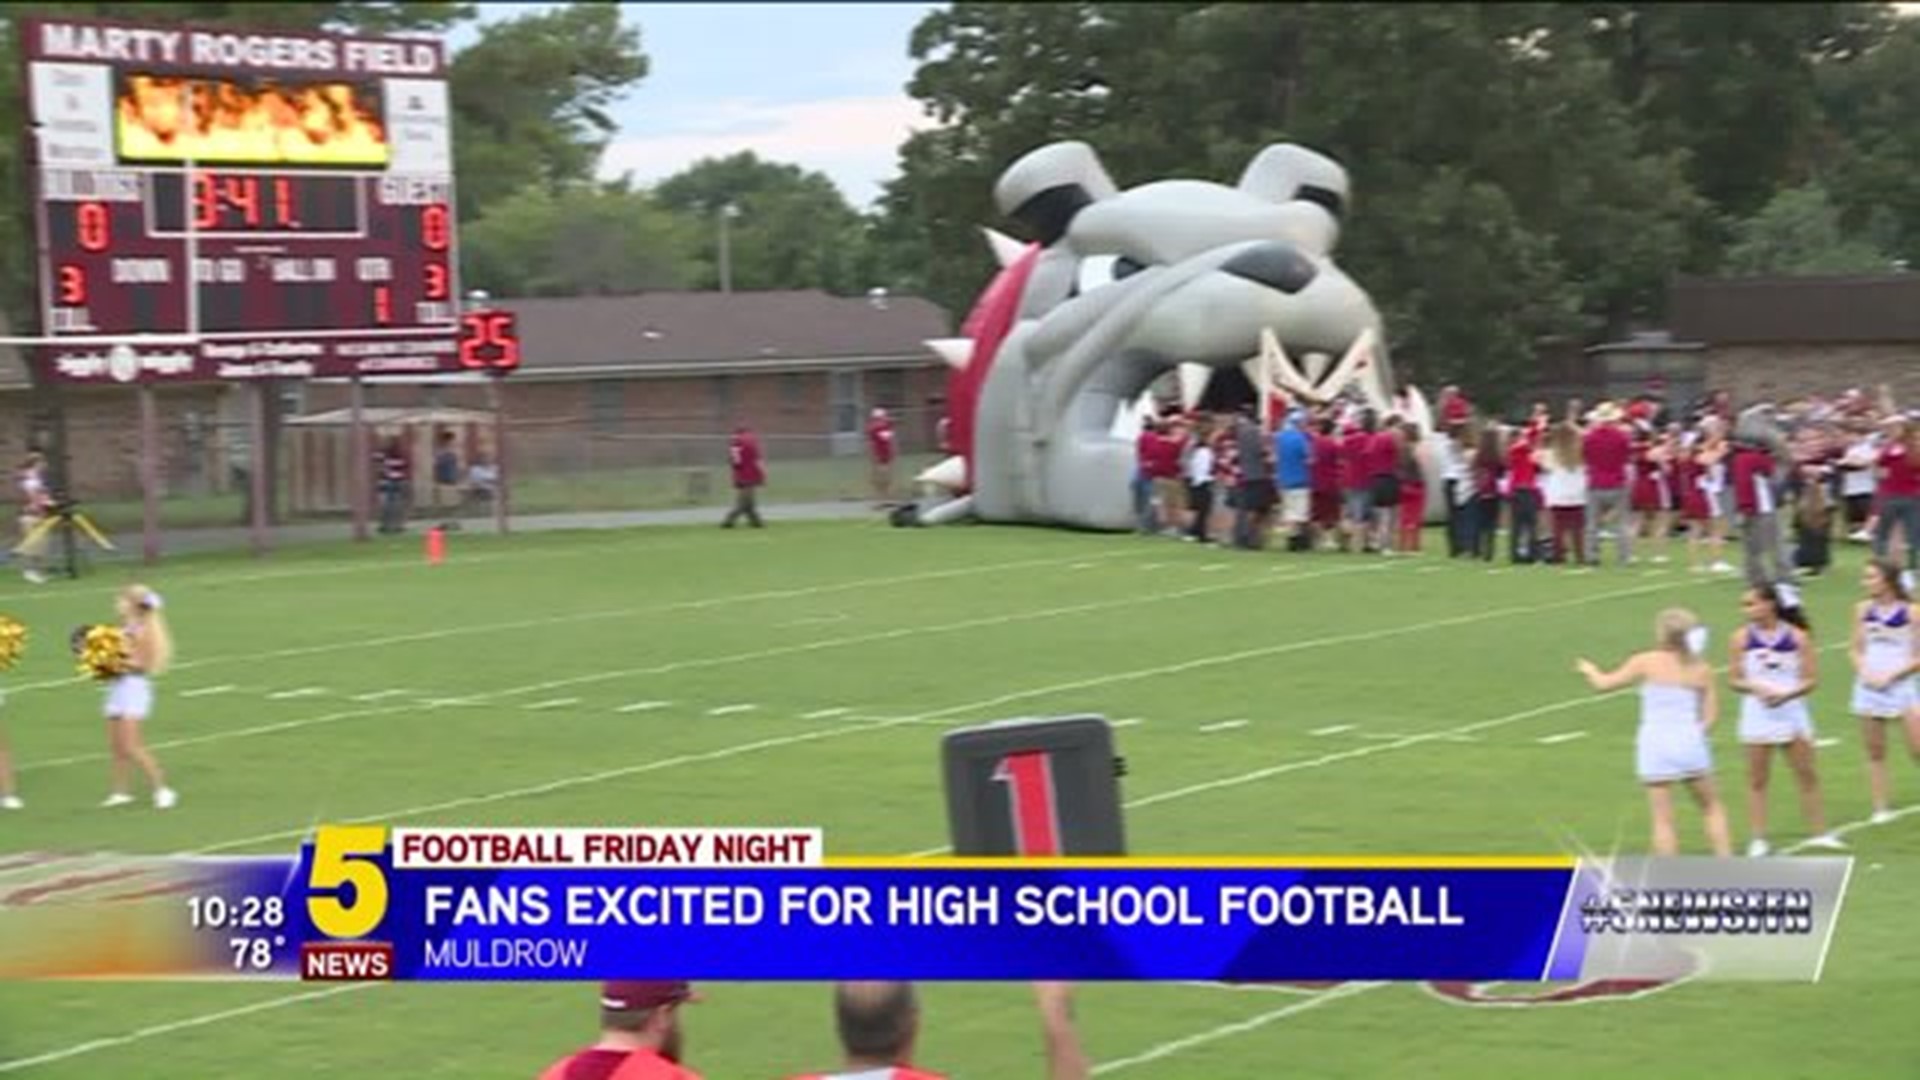 Fans Excited For High School Football